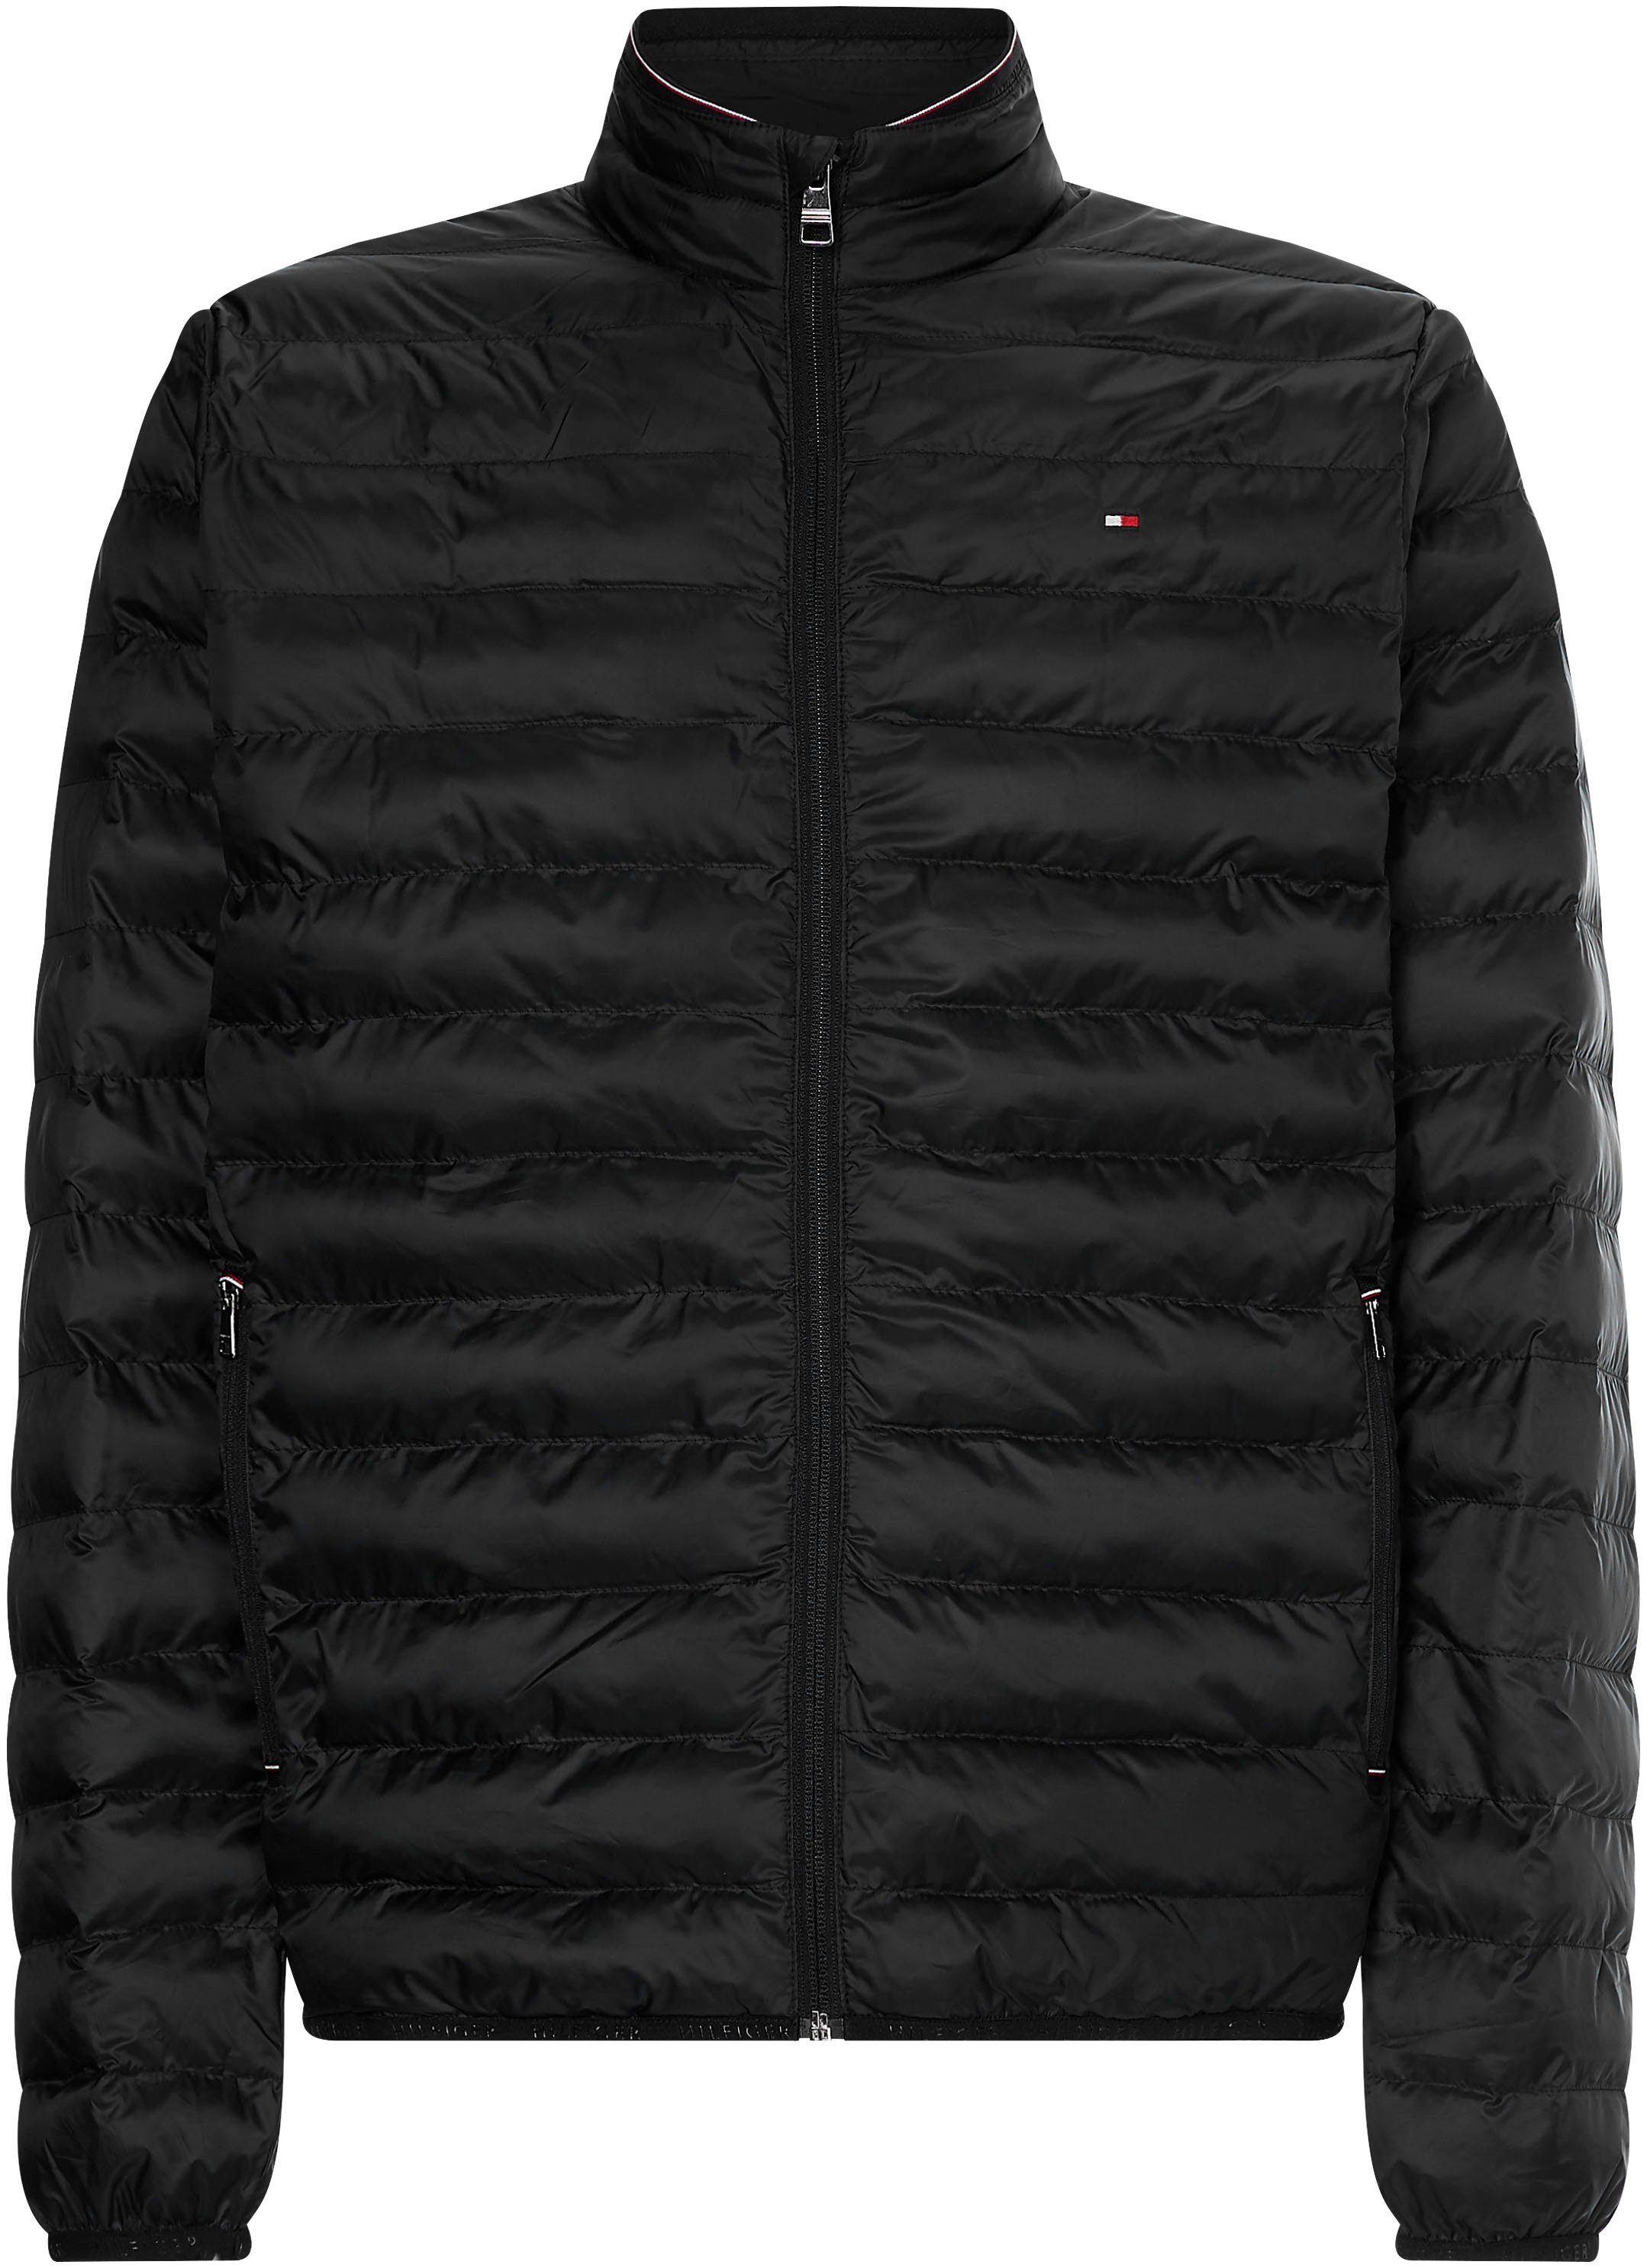 PACKABLE Hilfiger JACKET black CORE RECYCLED Tommy Steppjacke